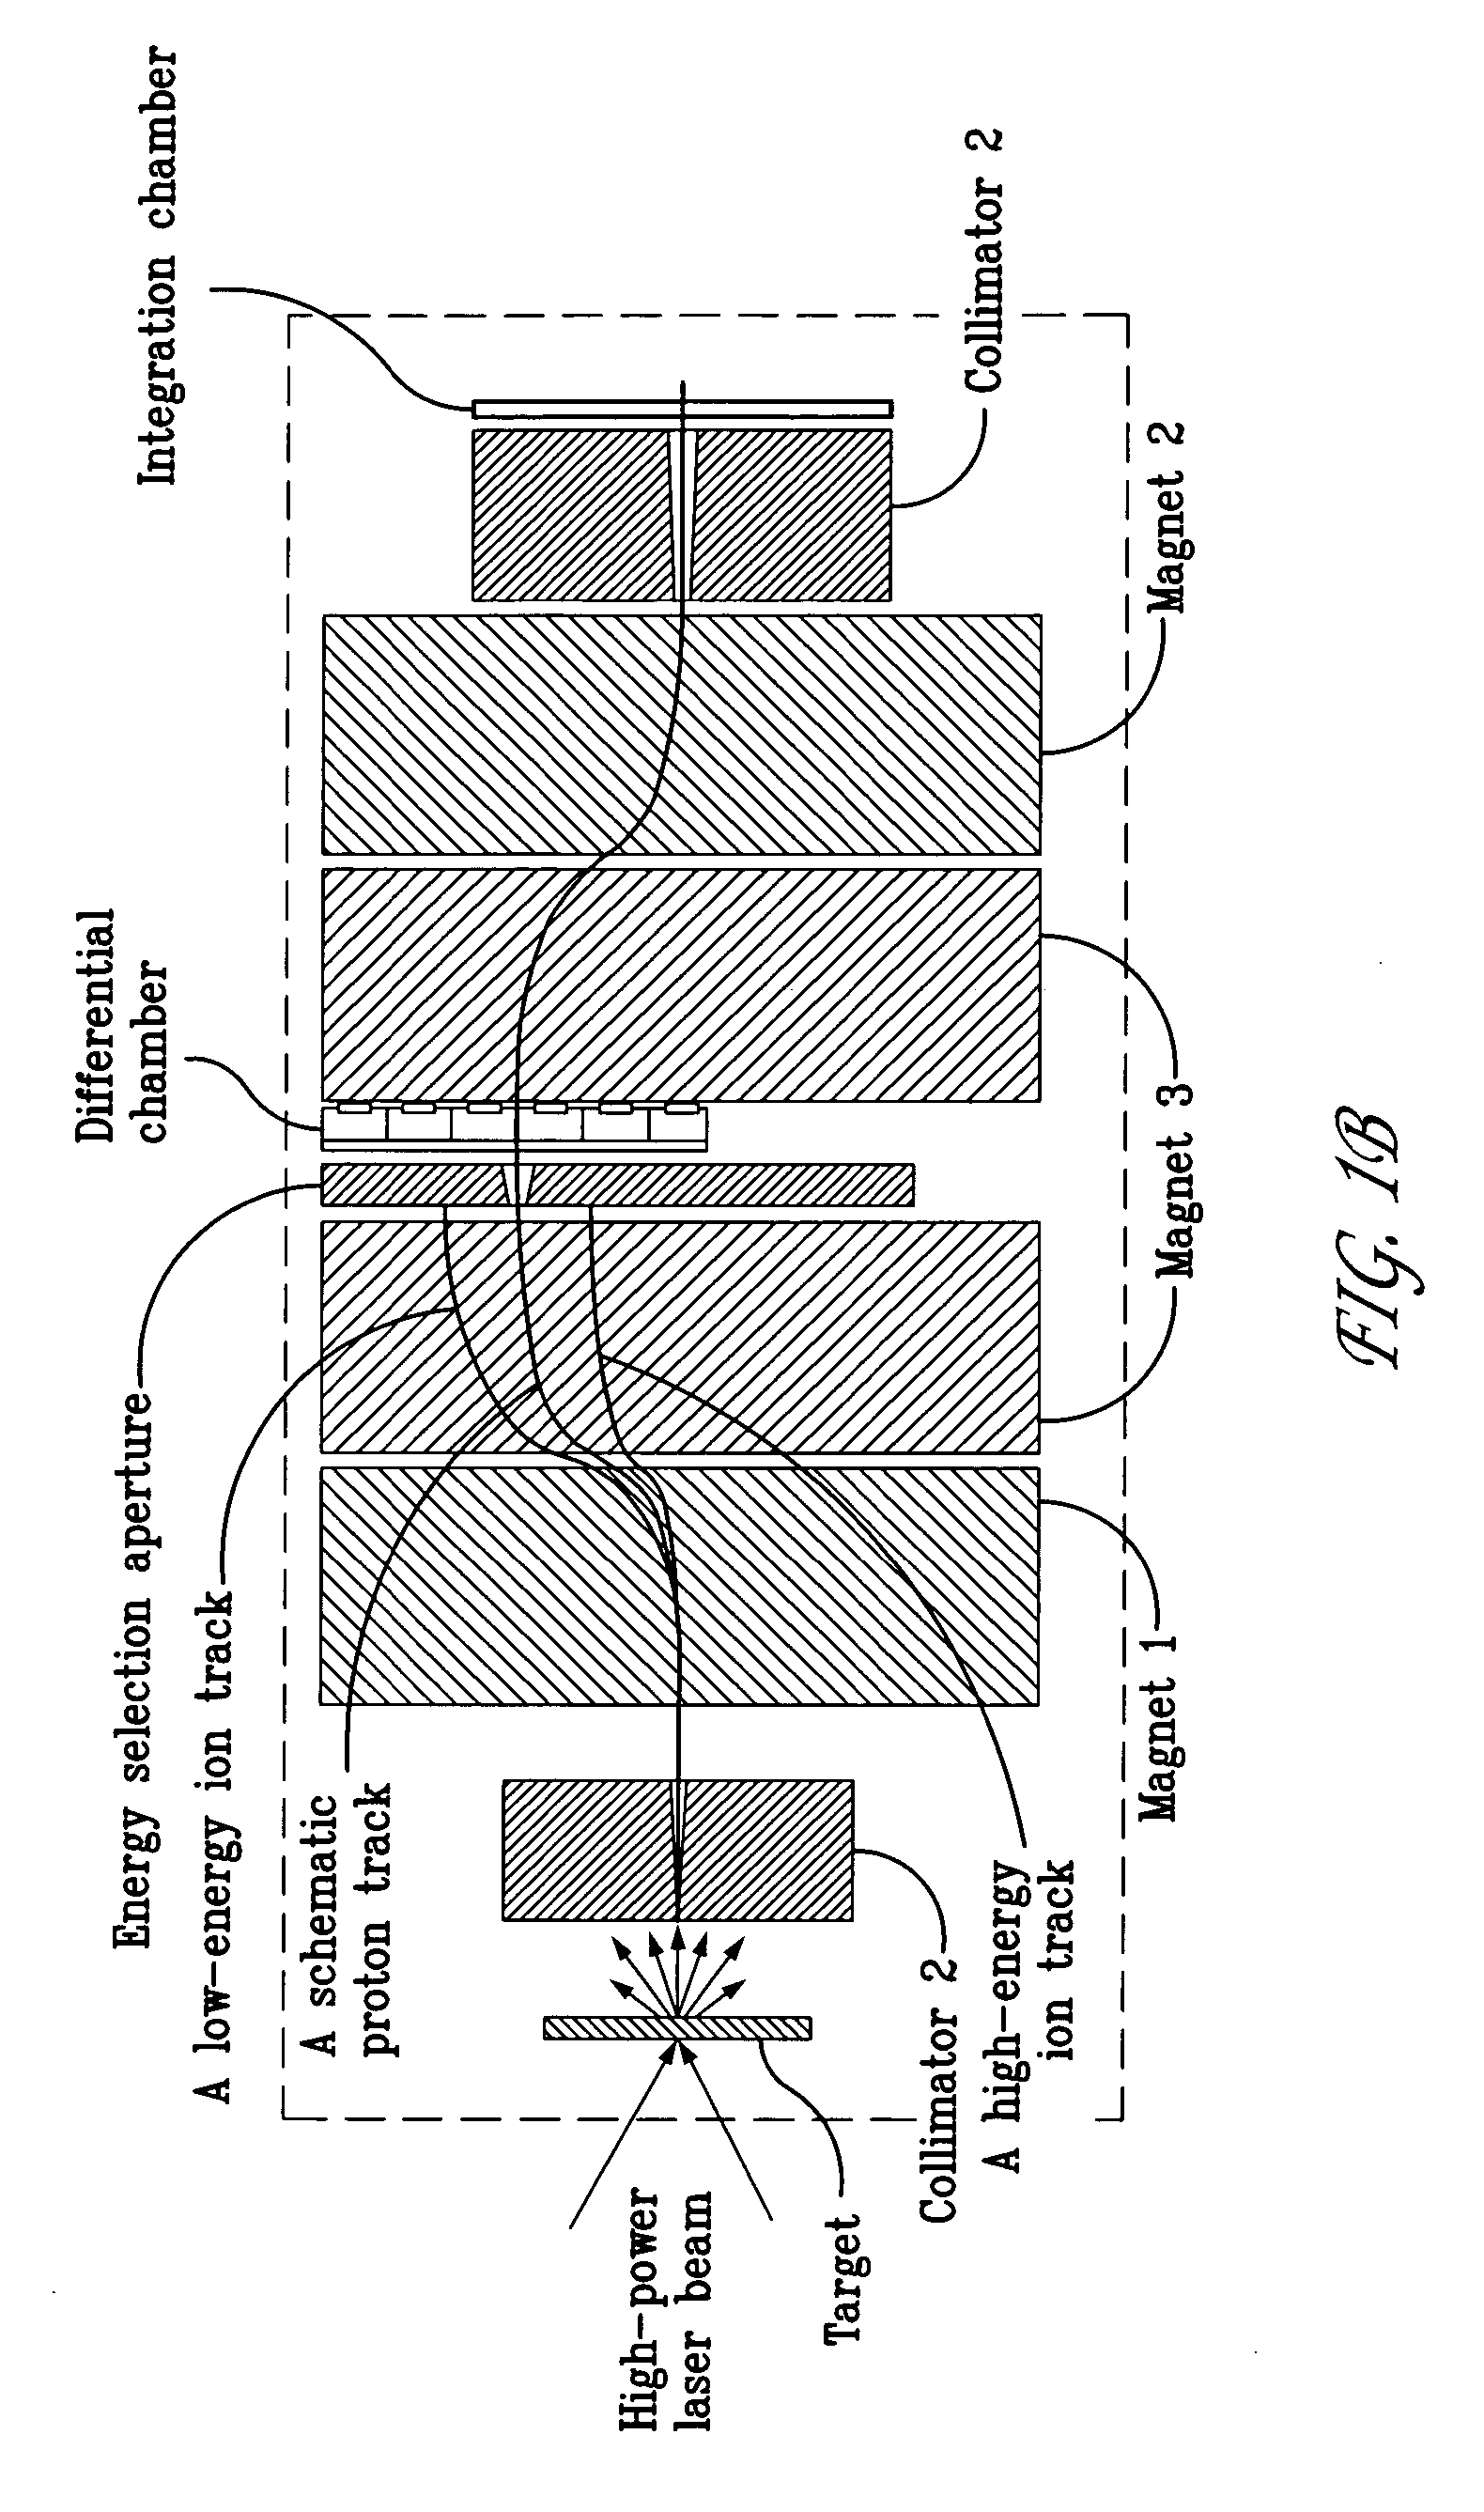 Method of modulating laser-accelerated protons for radiation therapy